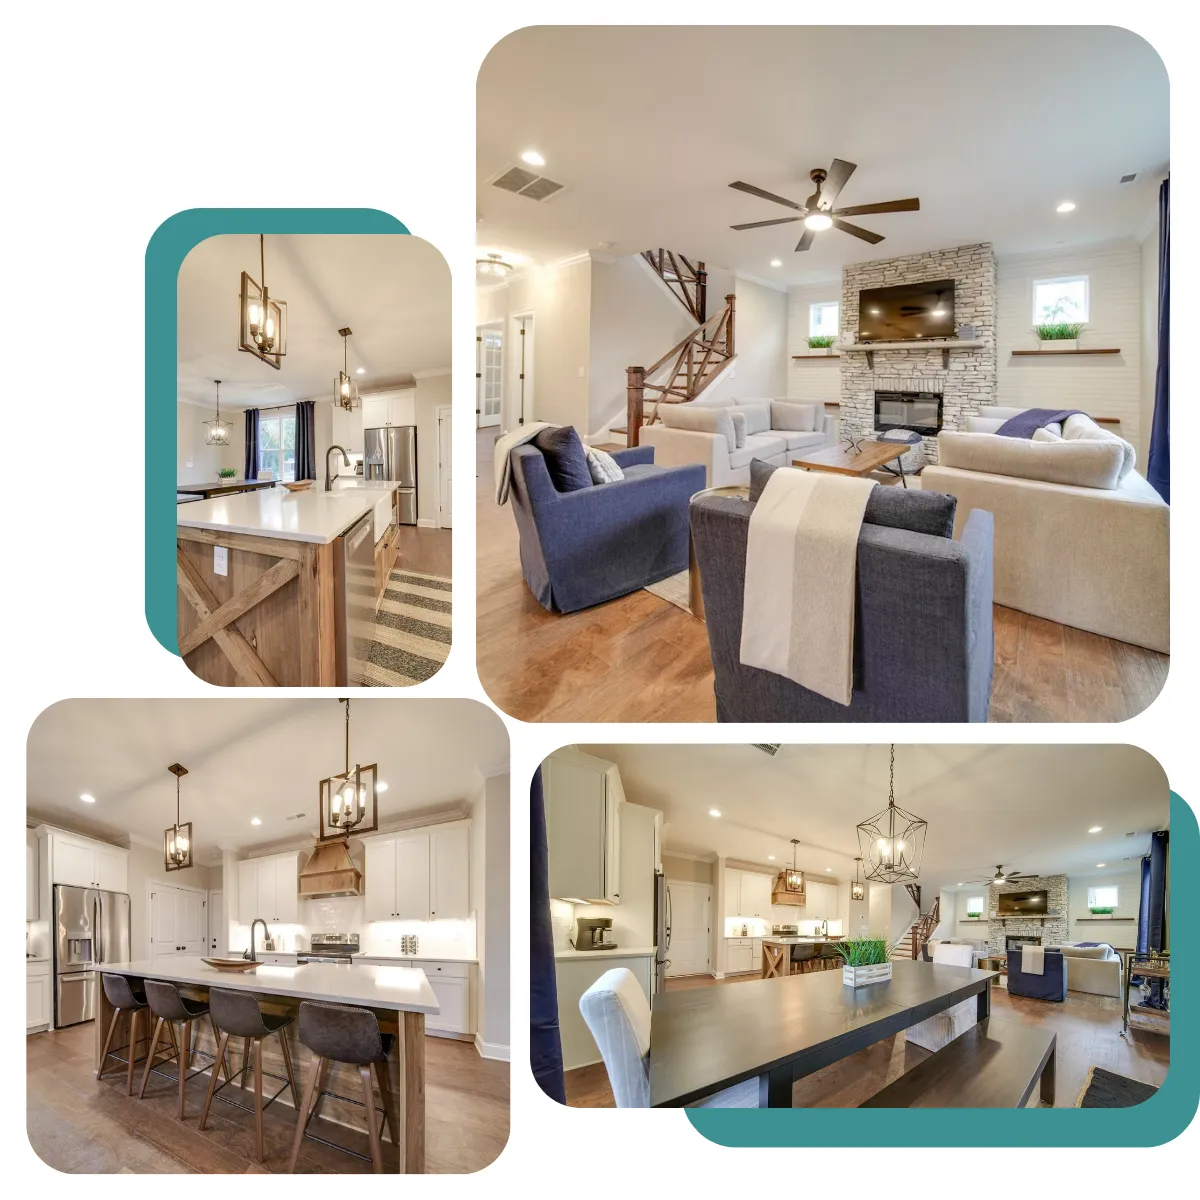 Relax at Belmont Getaway: Watch TV, cook in the big kitchen, play games in the cozy loft, or chill on the private patio. Feel at home away from home.